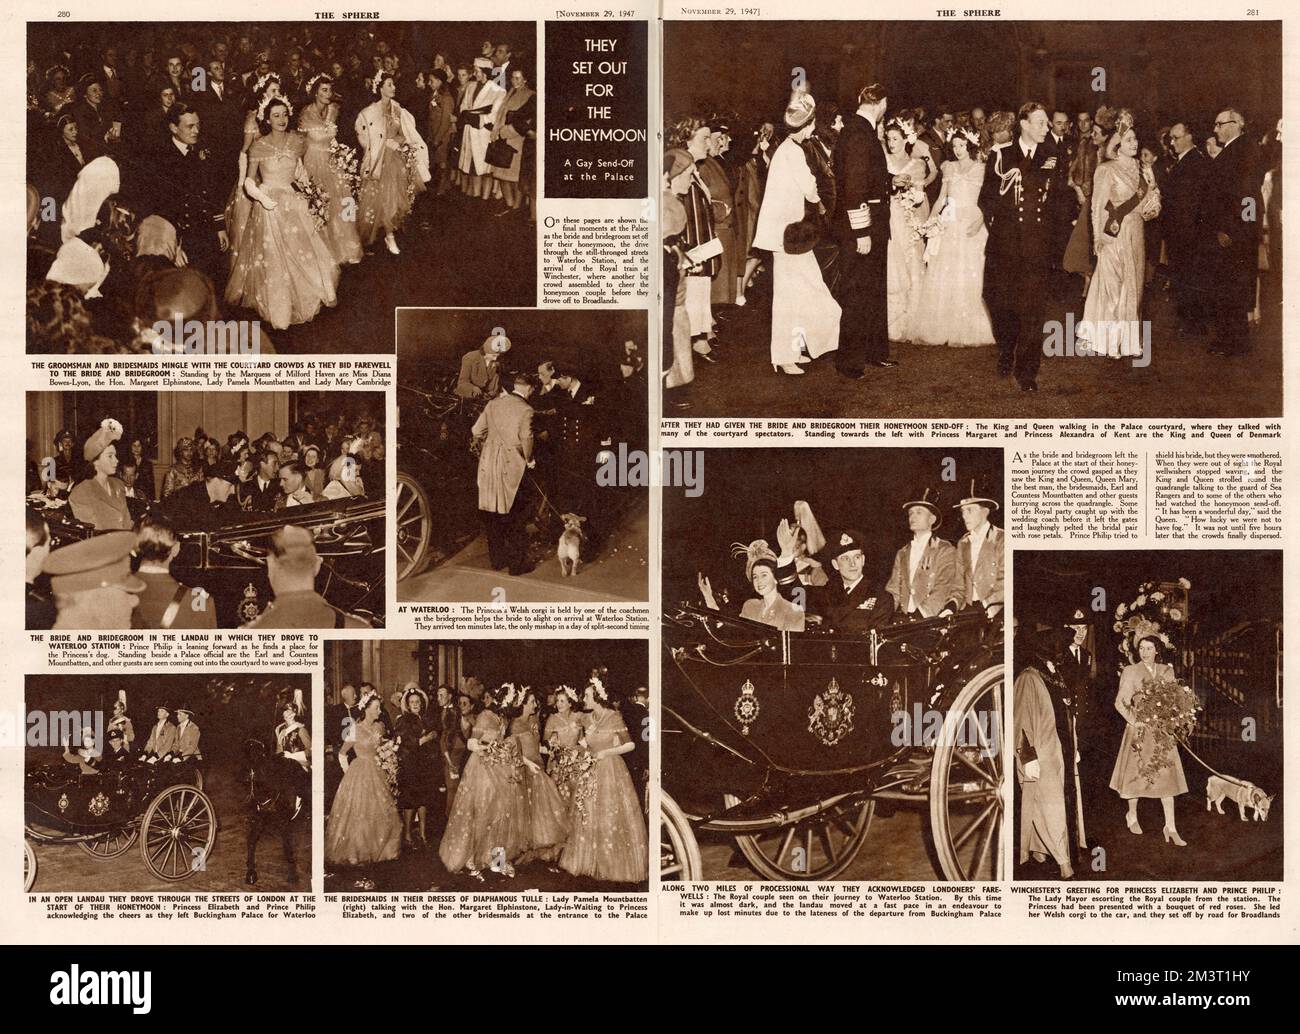 Page from The Sphere showing the newly married Princess Elizabeth and Duke of Edinburgh setting off from Buckingham Palace in a landau carriage for Waterloo Station from where they would depart on their honeymoon. Waving them off in the top photograph is the best man, the Marquess of Milford Haven, and four of the bridesmaids, Diana Bowes Lyon, Margaret Elphinstone, Pamela Mountbatten and Lady Mary Cambridge. Stock Photo